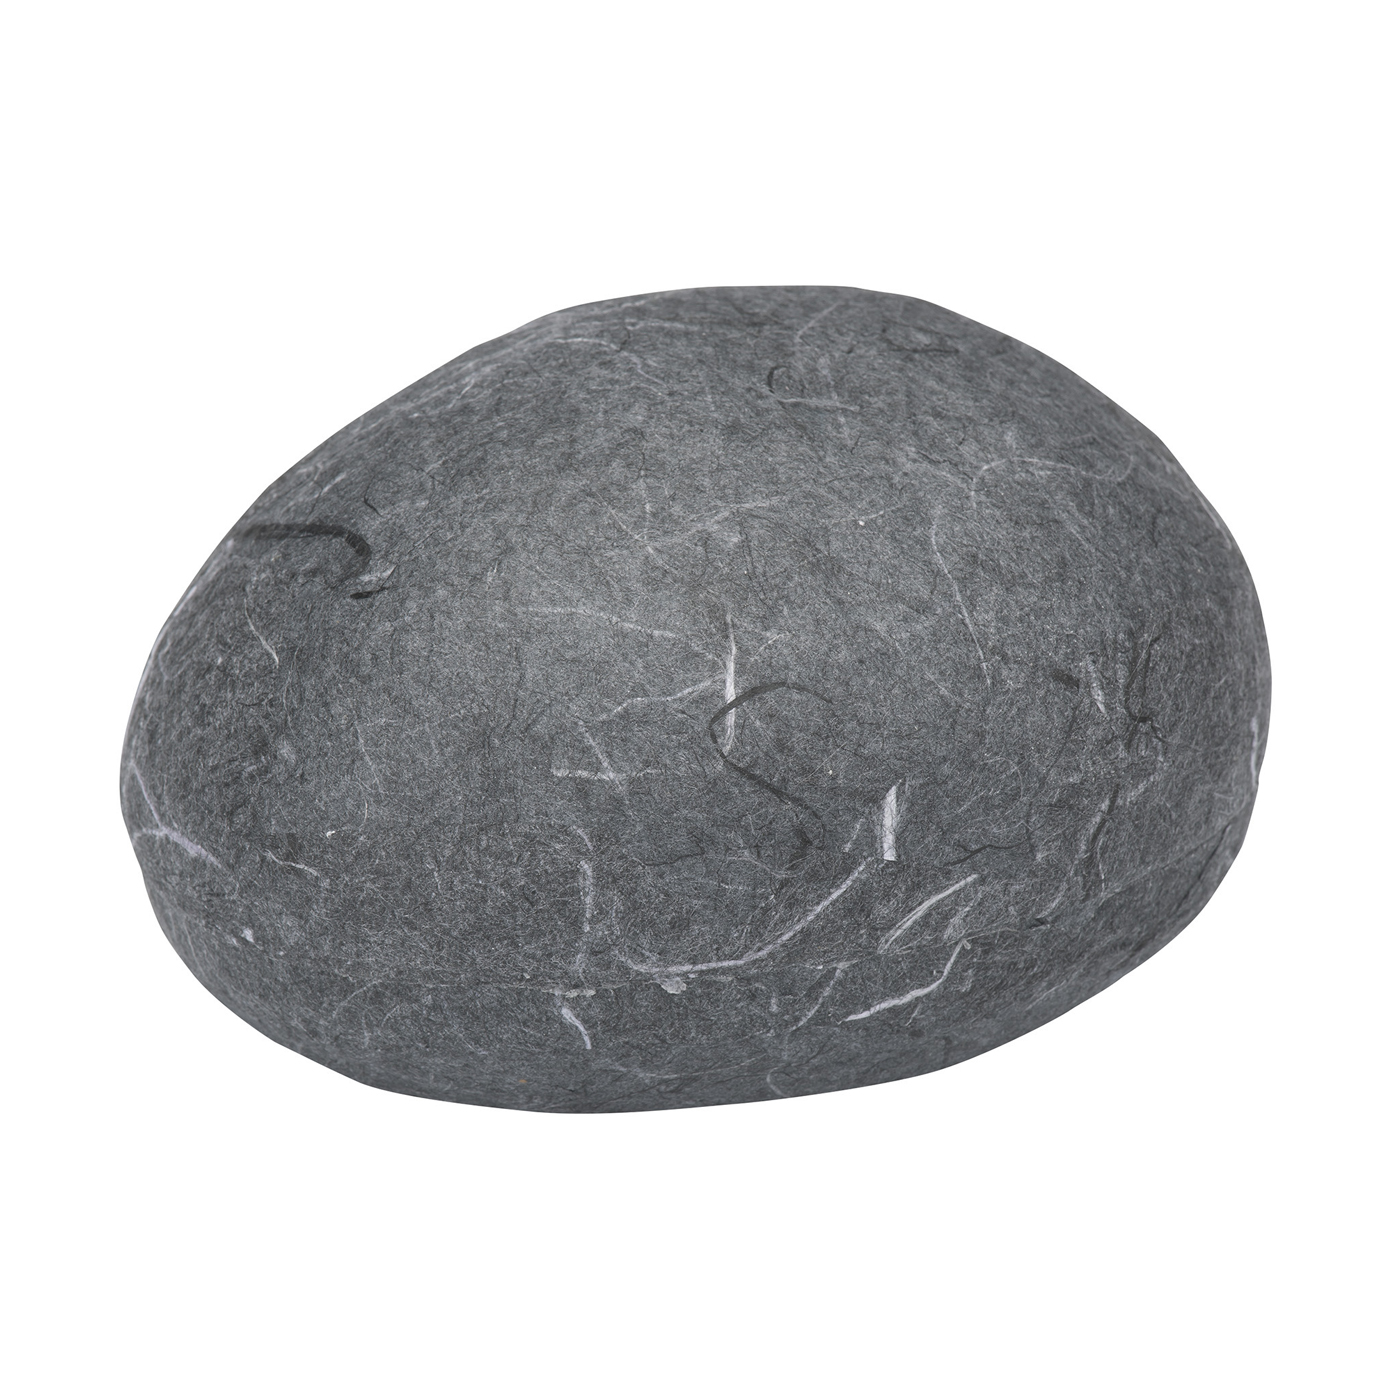 Jewellery Packaging "Stone", Anthracite Mottled,100x70x60 mm - 1 piece